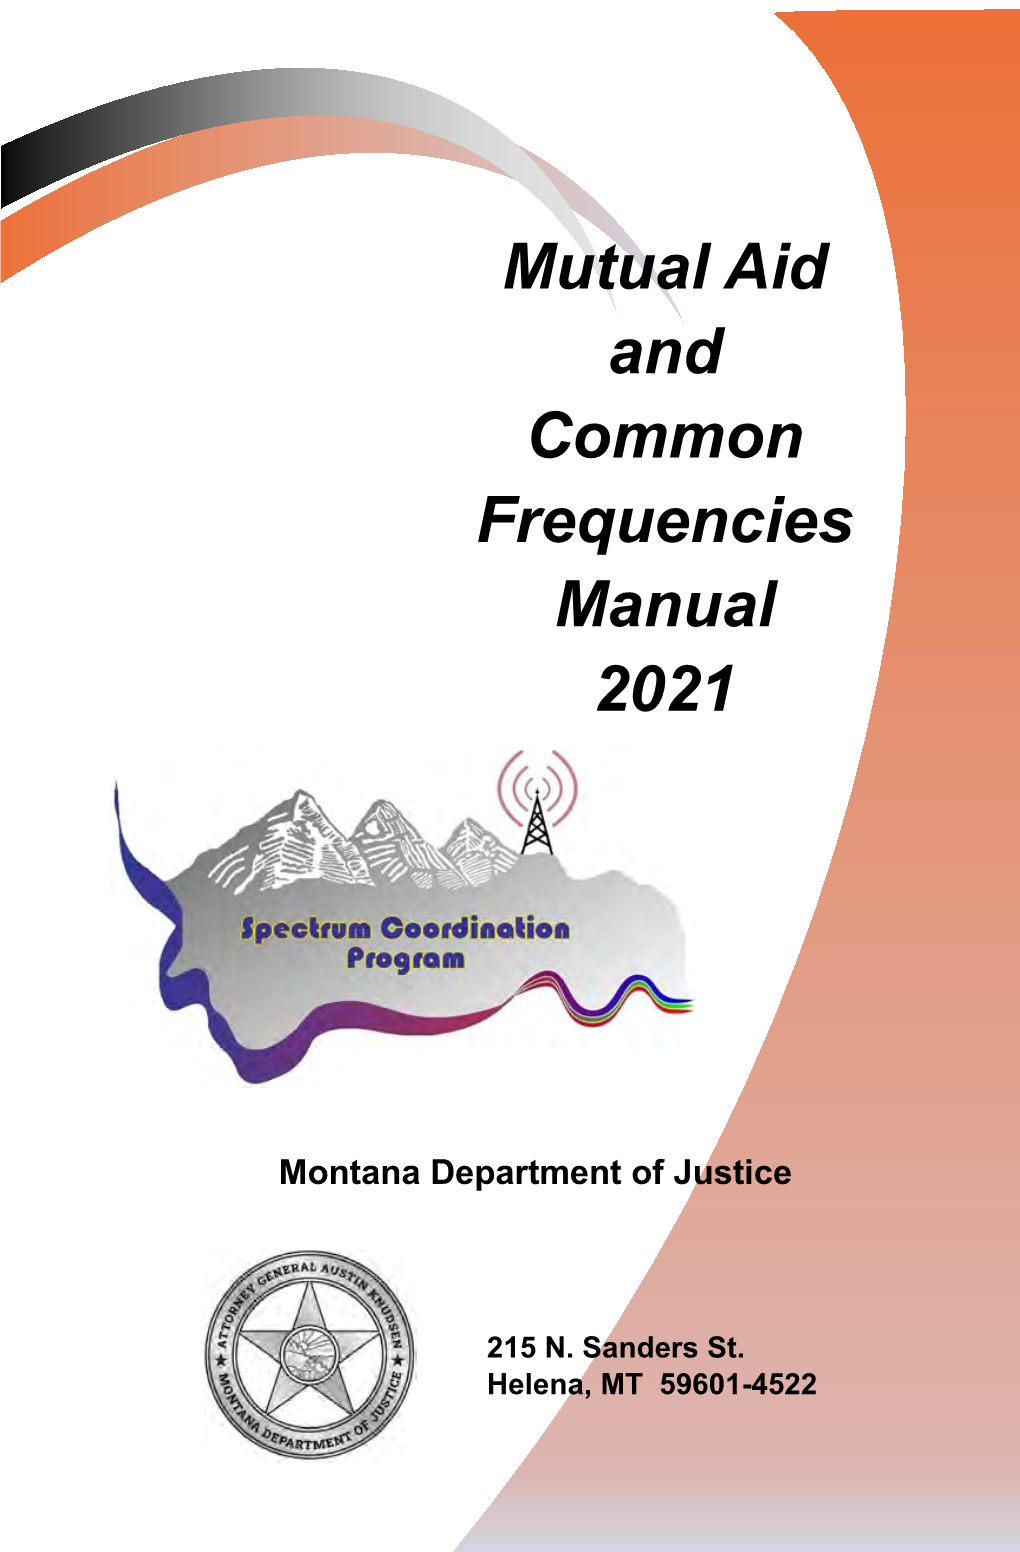 Mutual Aid and Common Frequencies Manual 2021